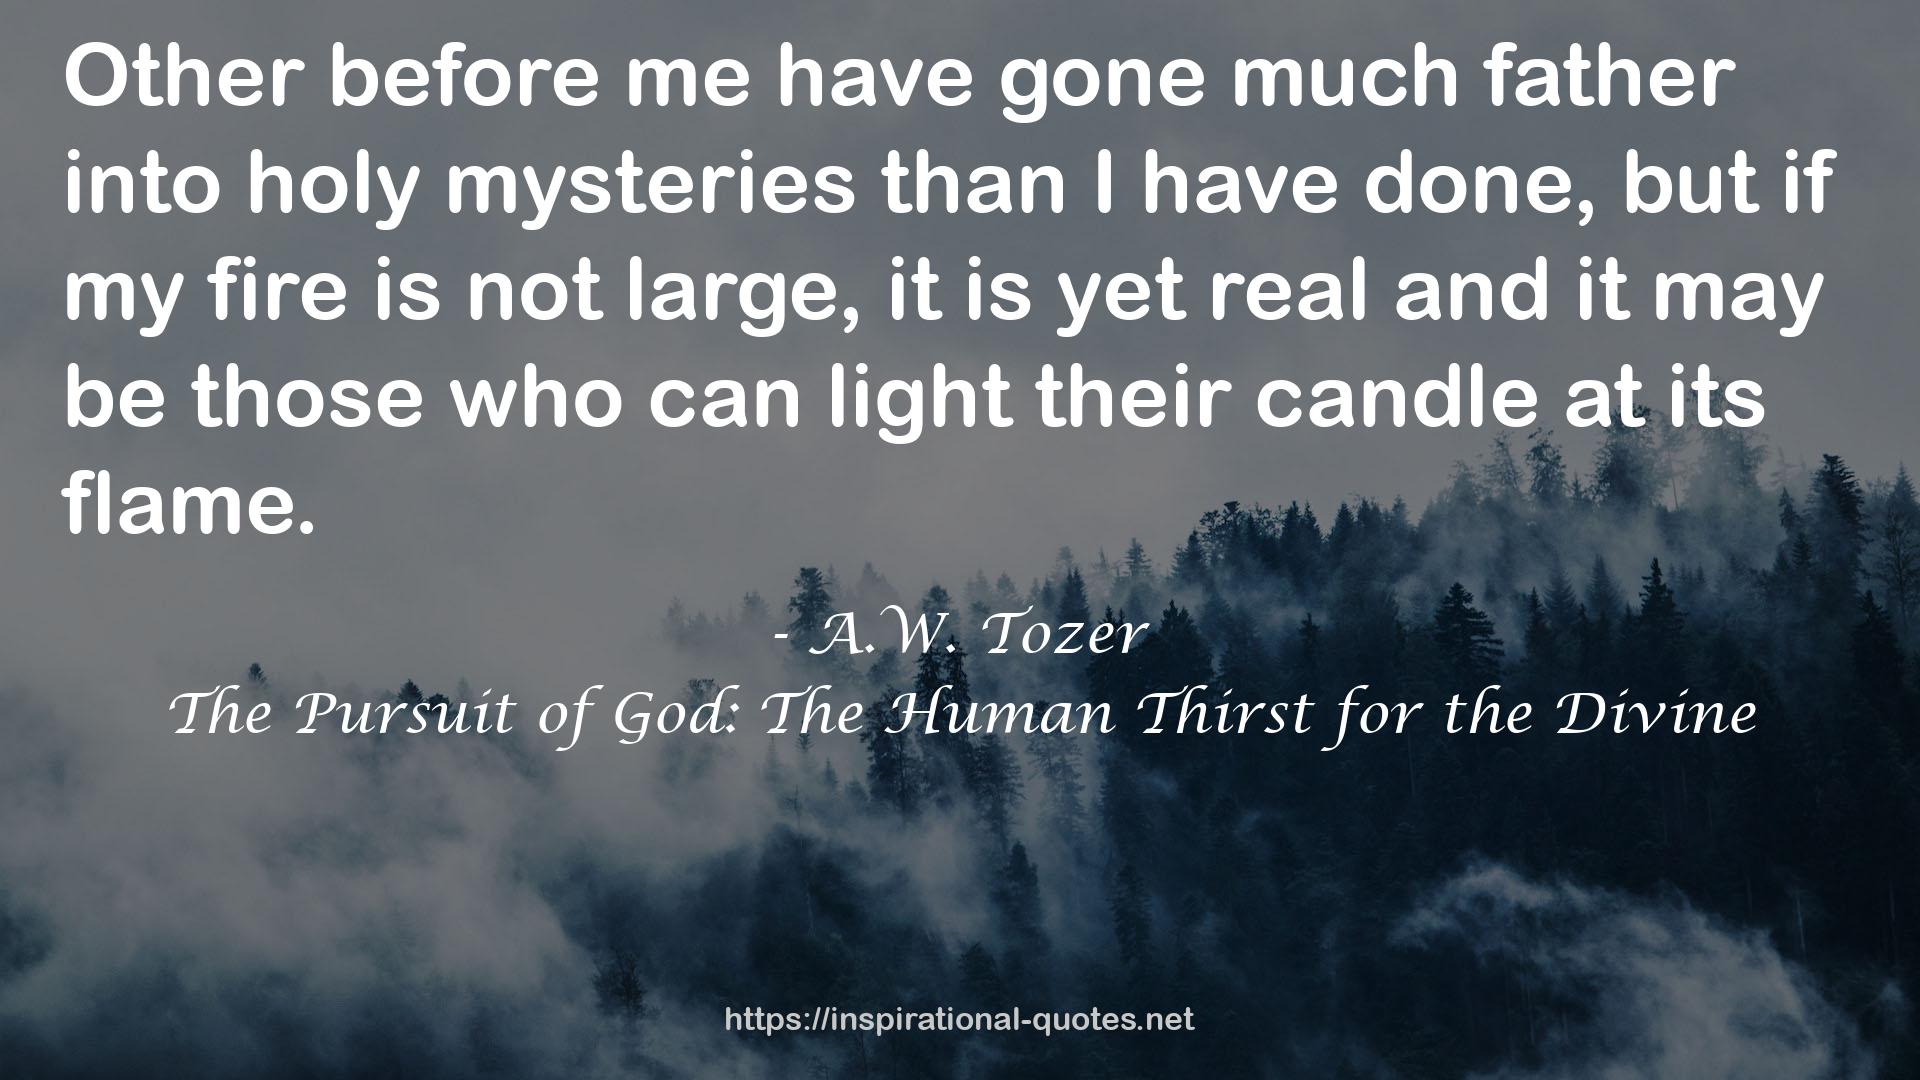 The Pursuit of God: The Human Thirst for the Divine QUOTES